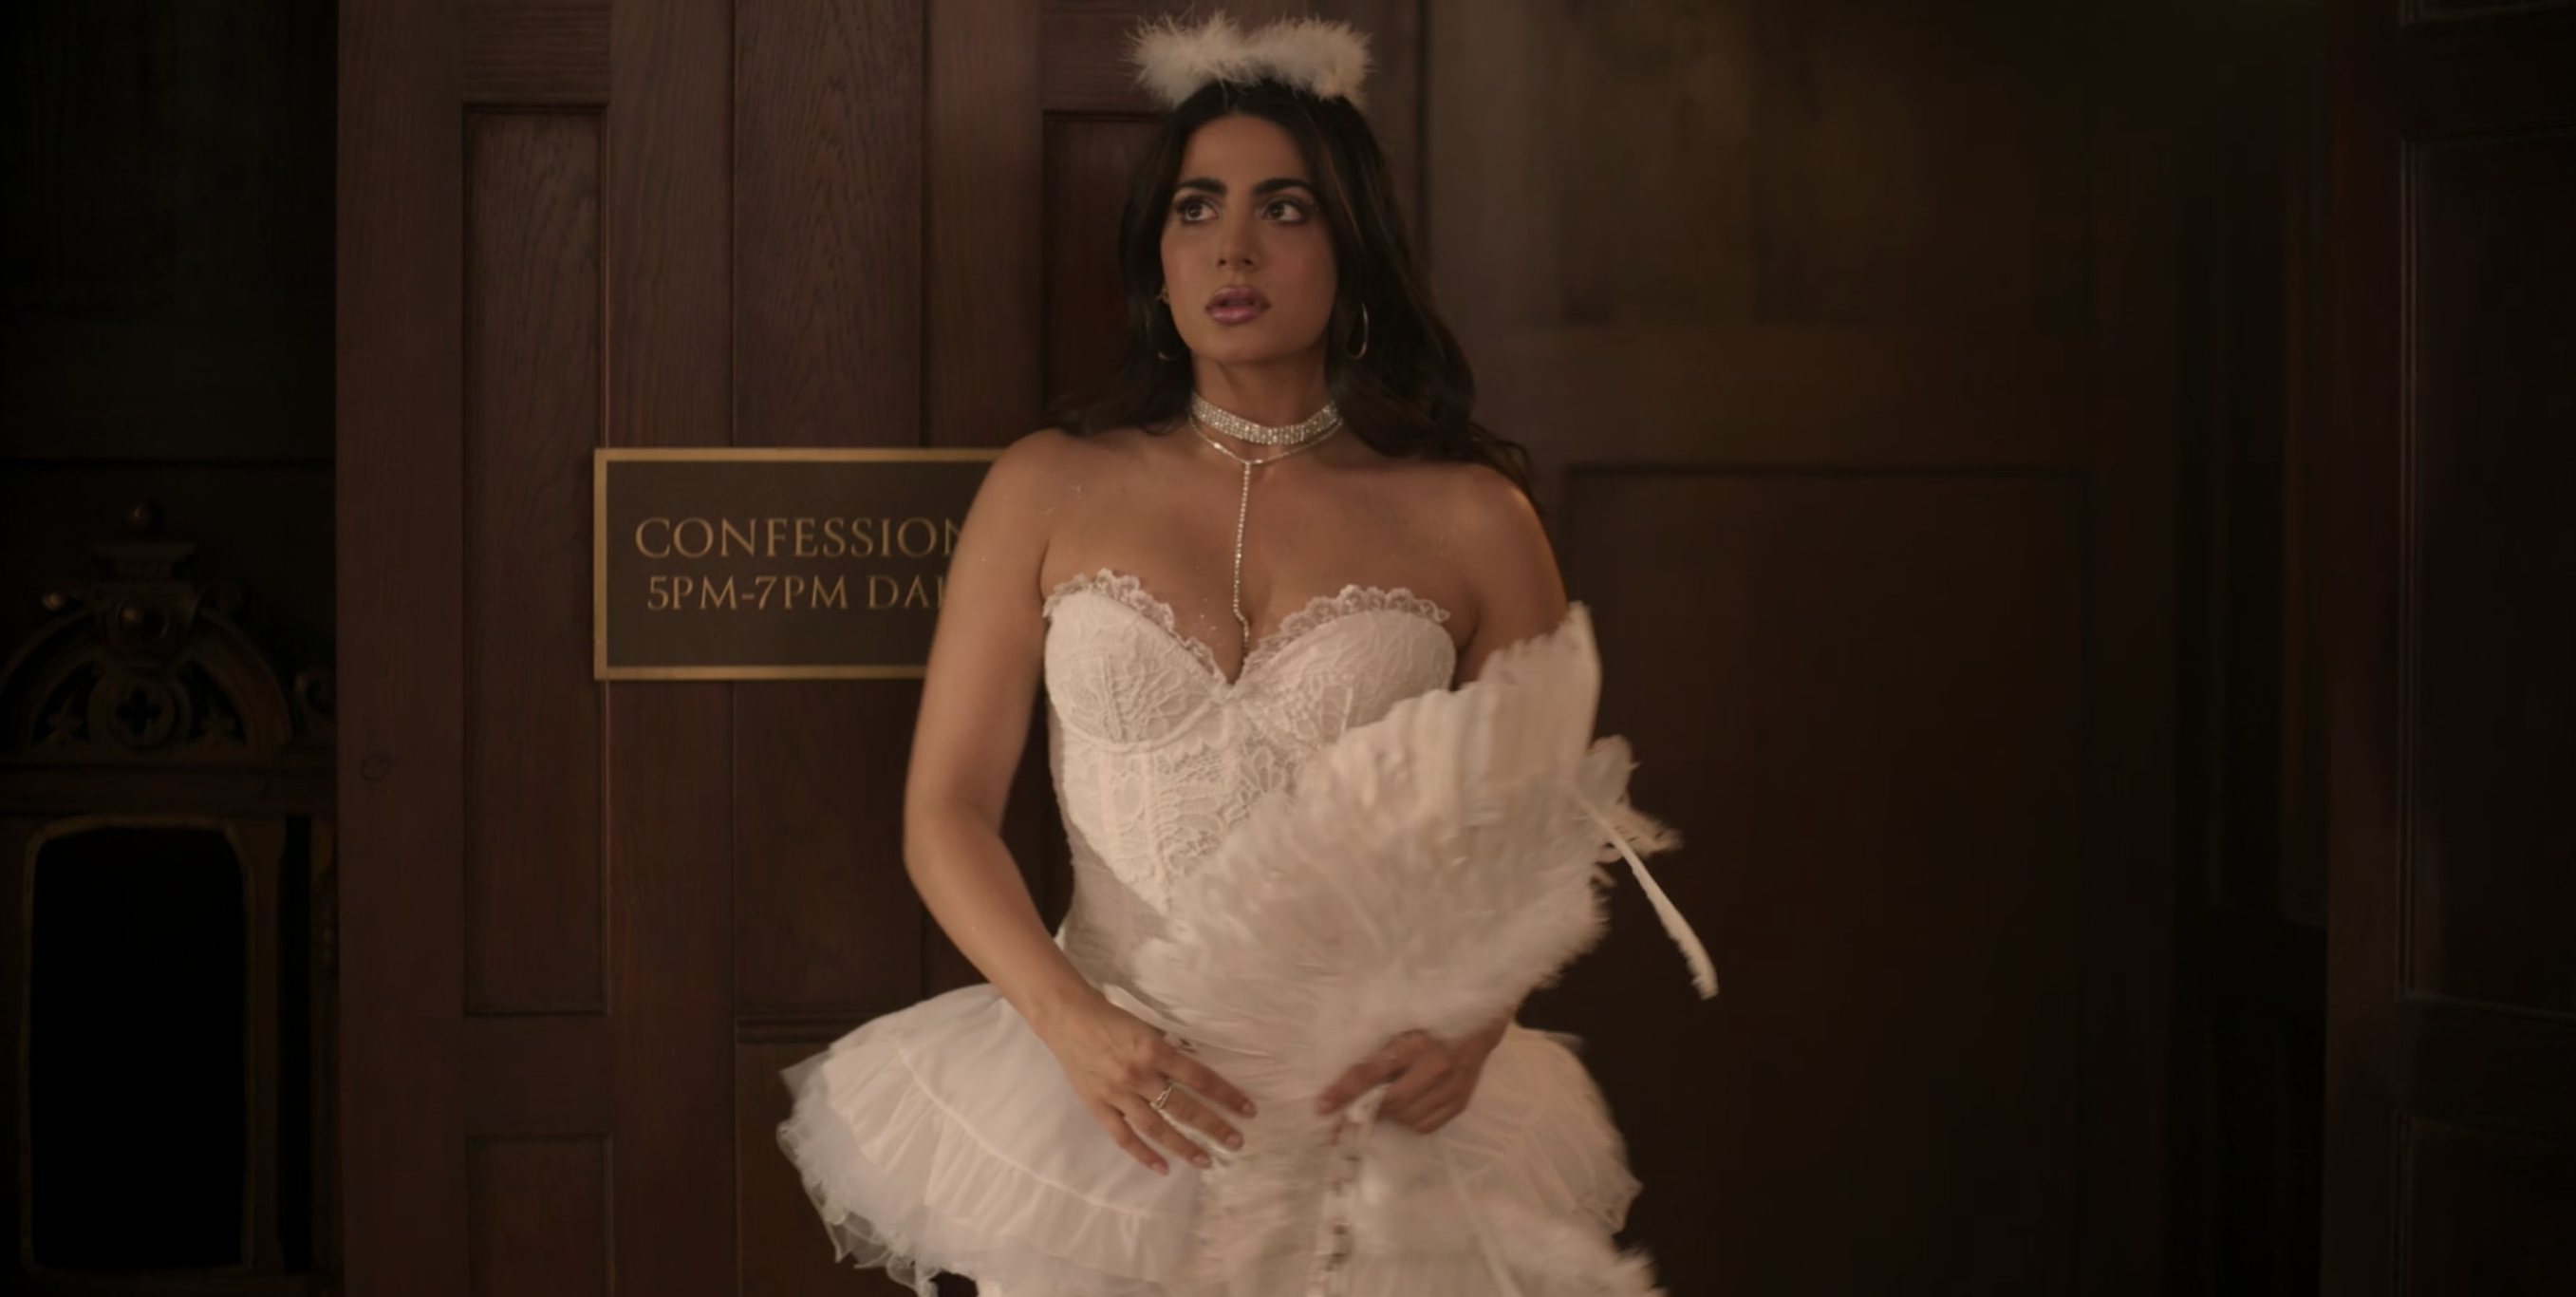 Lily stepping out of a confessional while in an angel costume